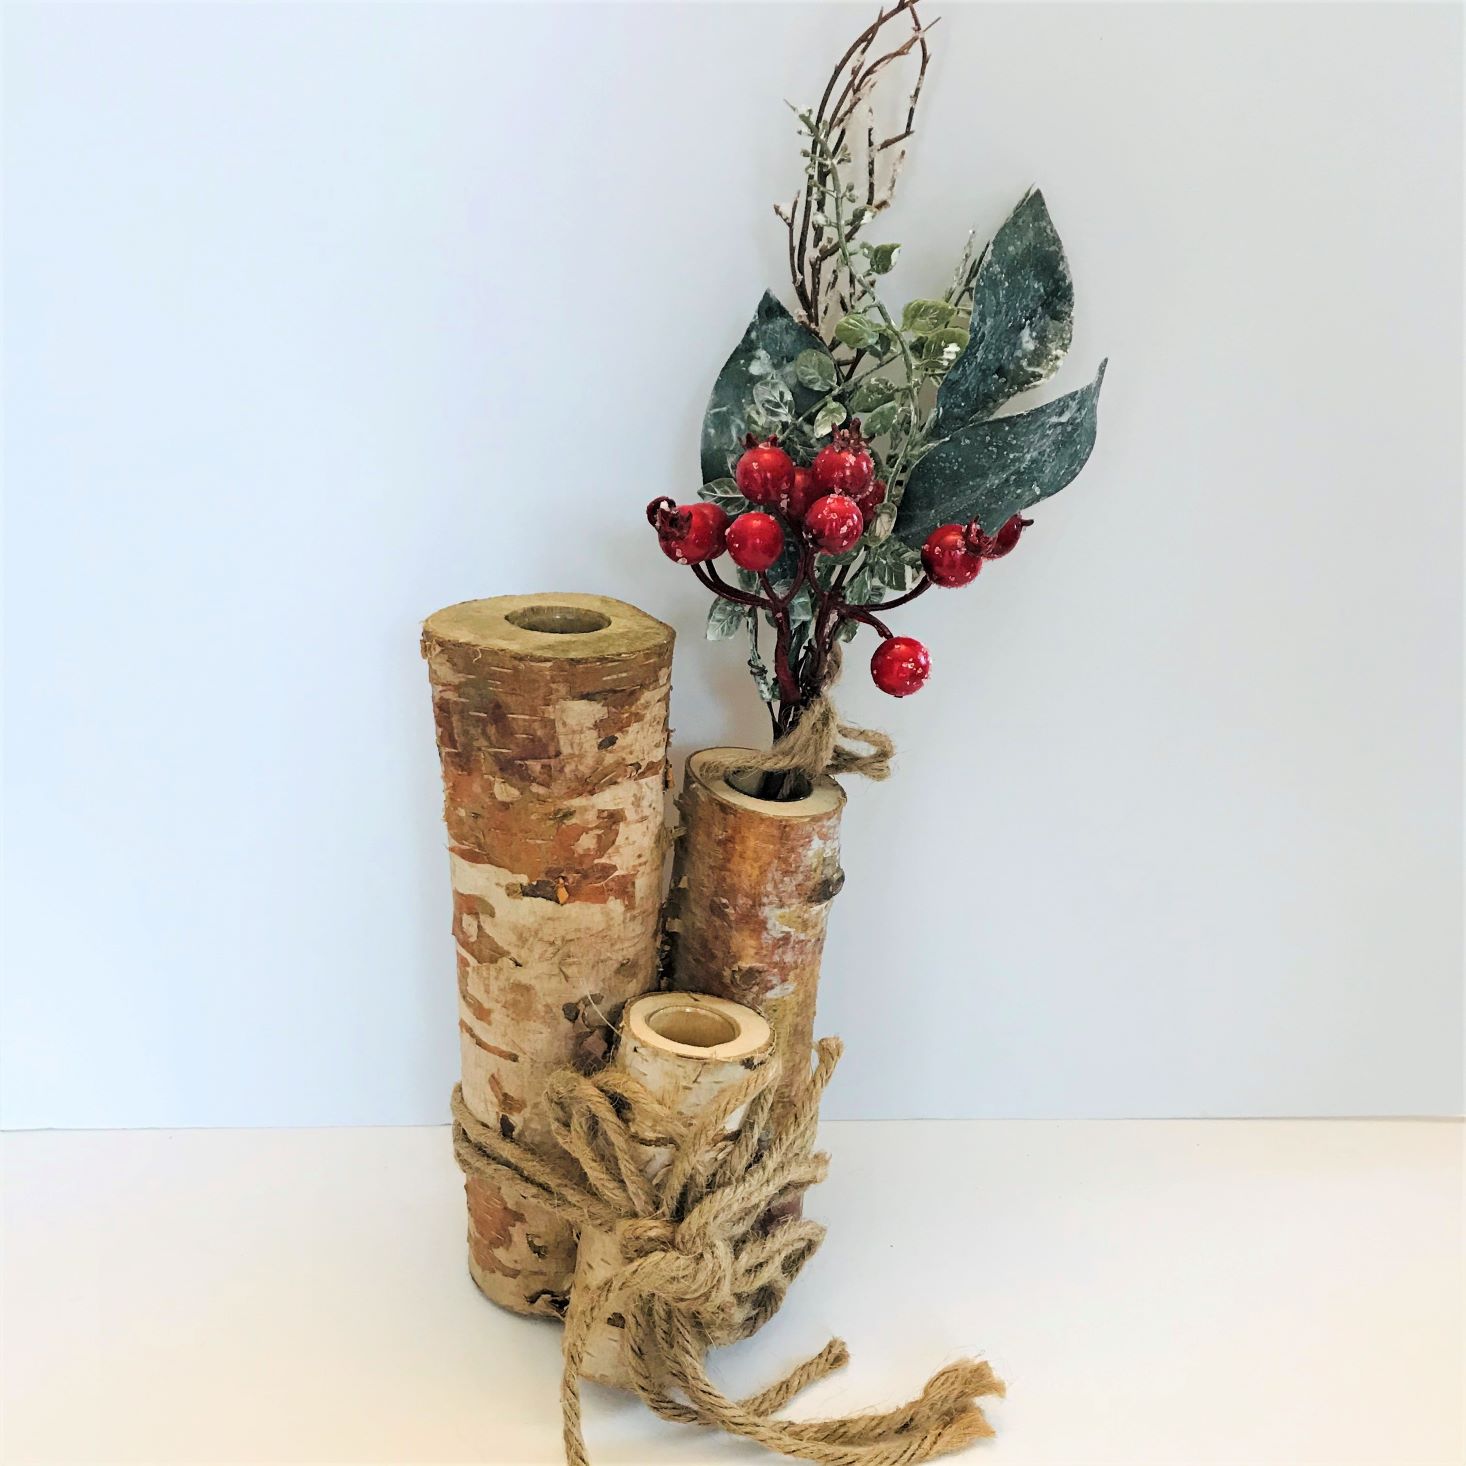 Habitation Box December 2019 tube with bouquet in it